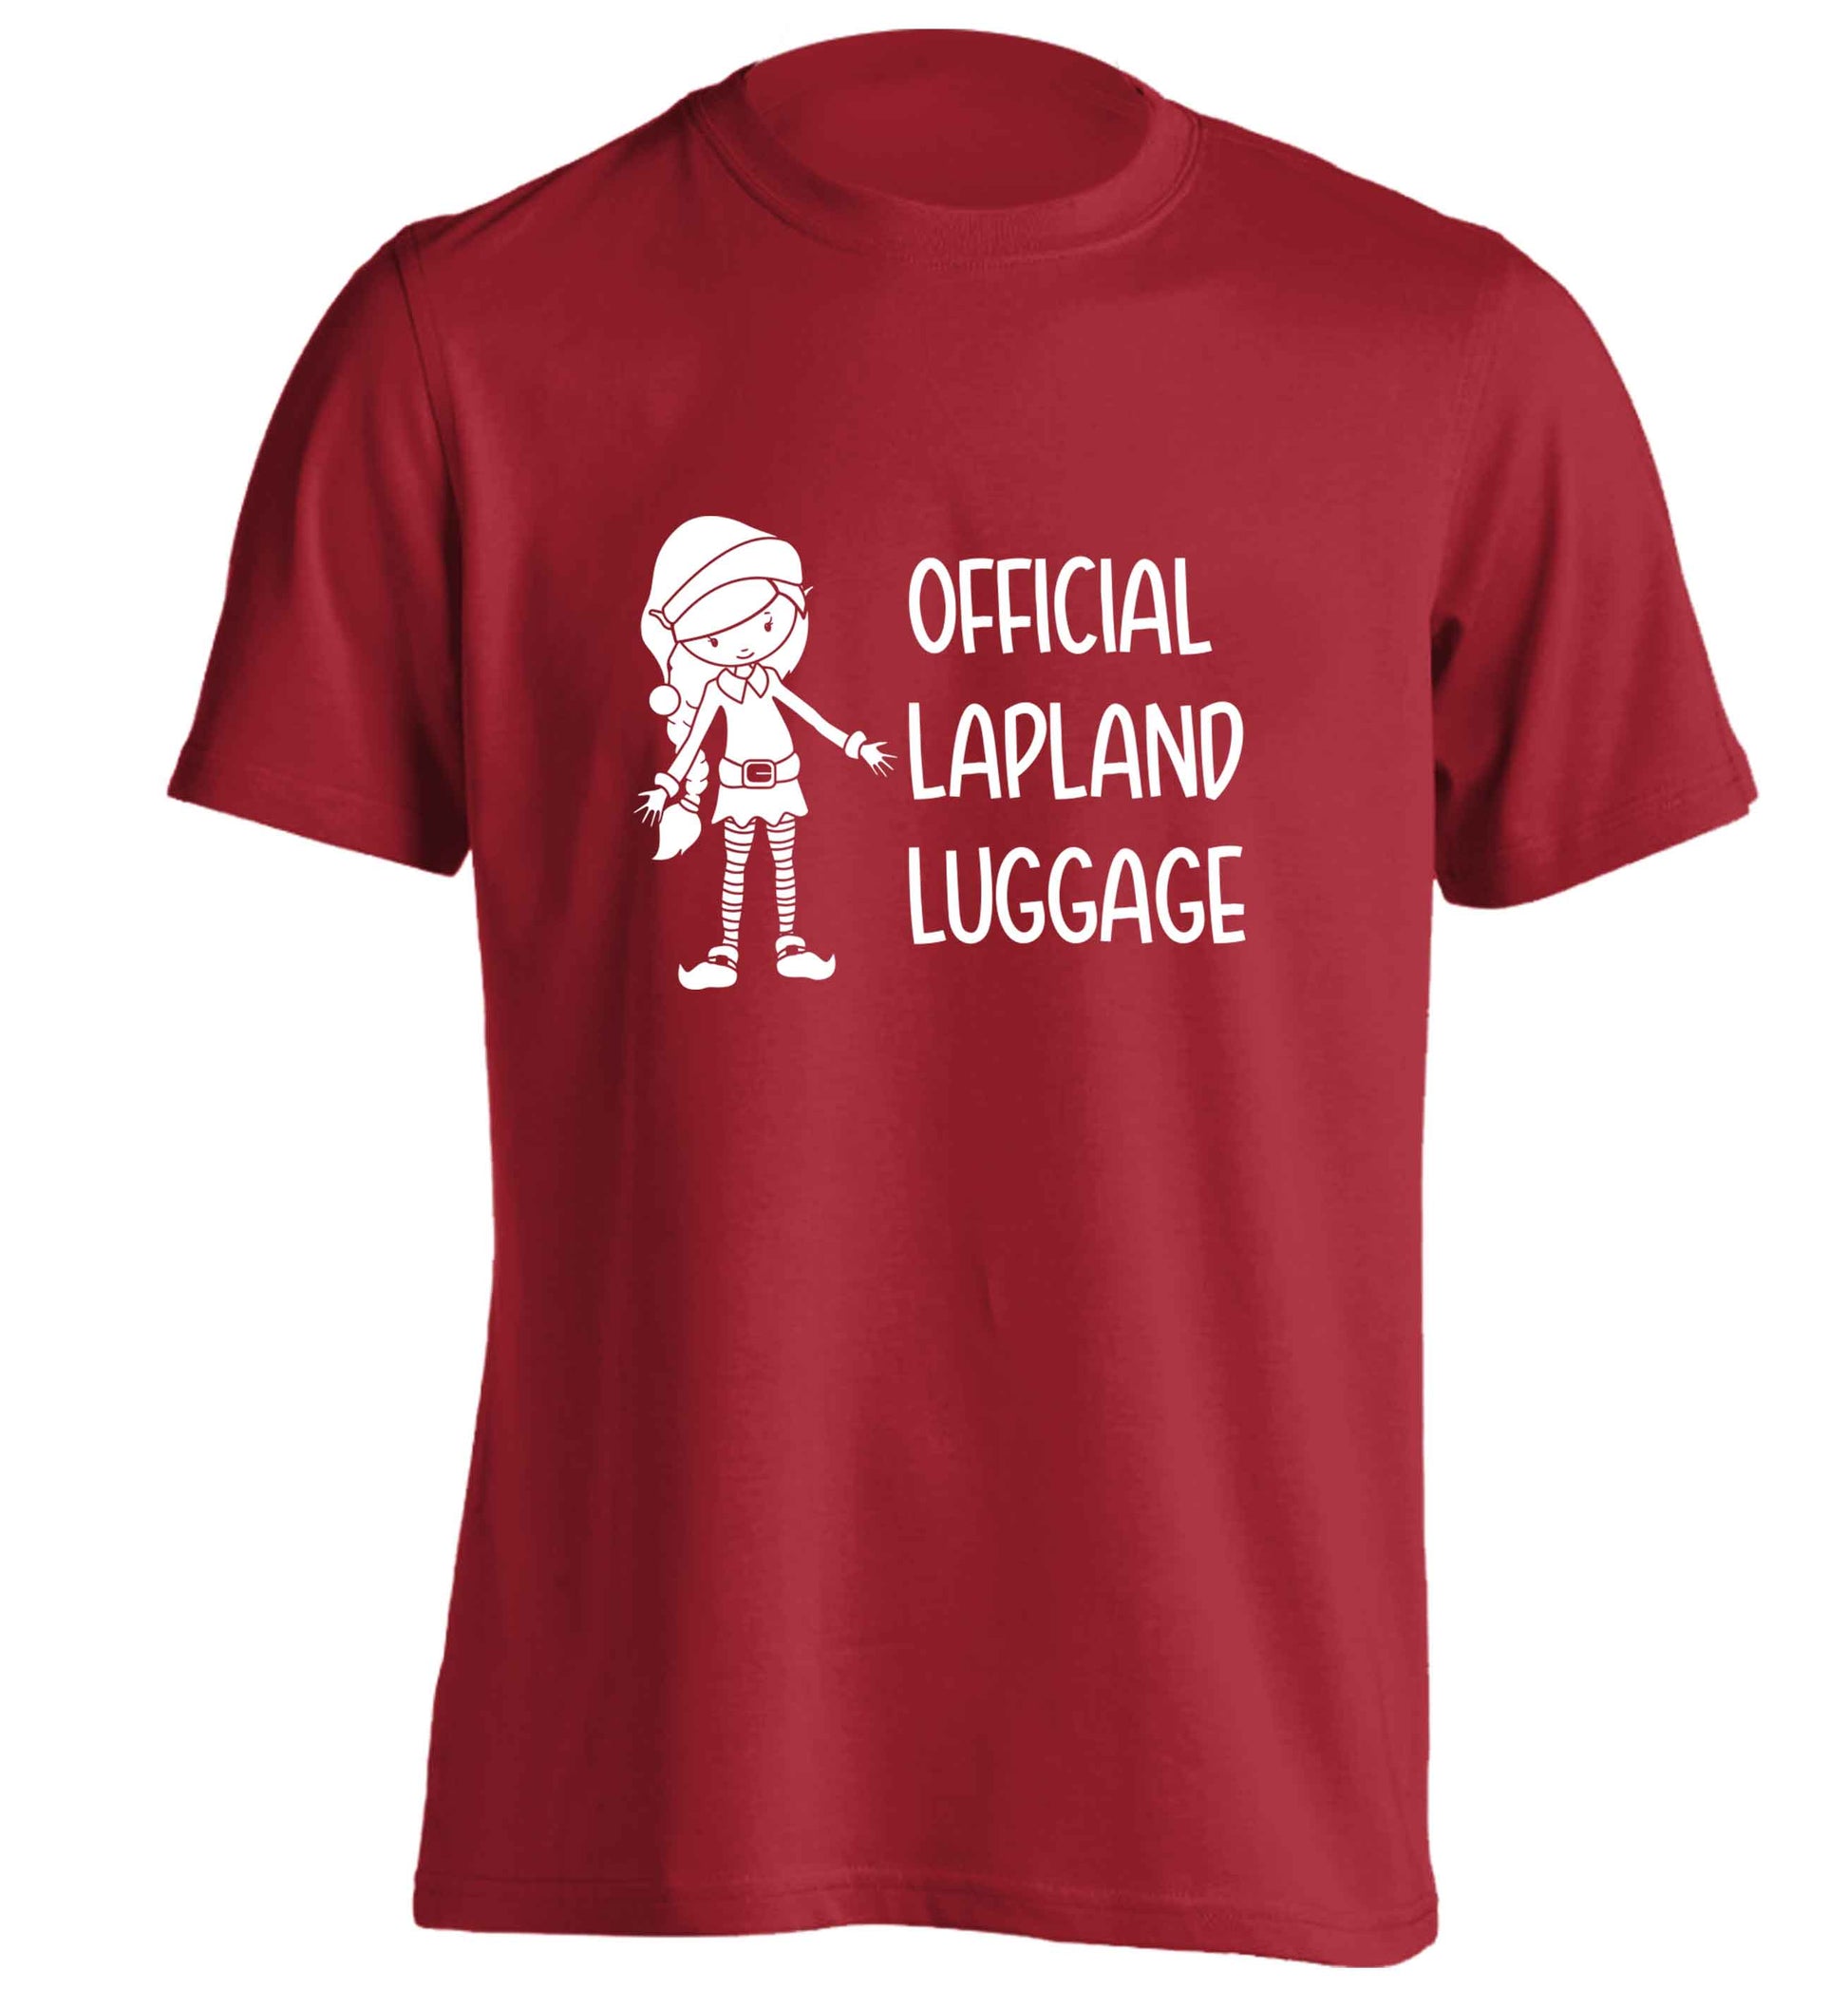 Official lapland luggage - Elf snowflake adults unisex red Tshirt 2XL